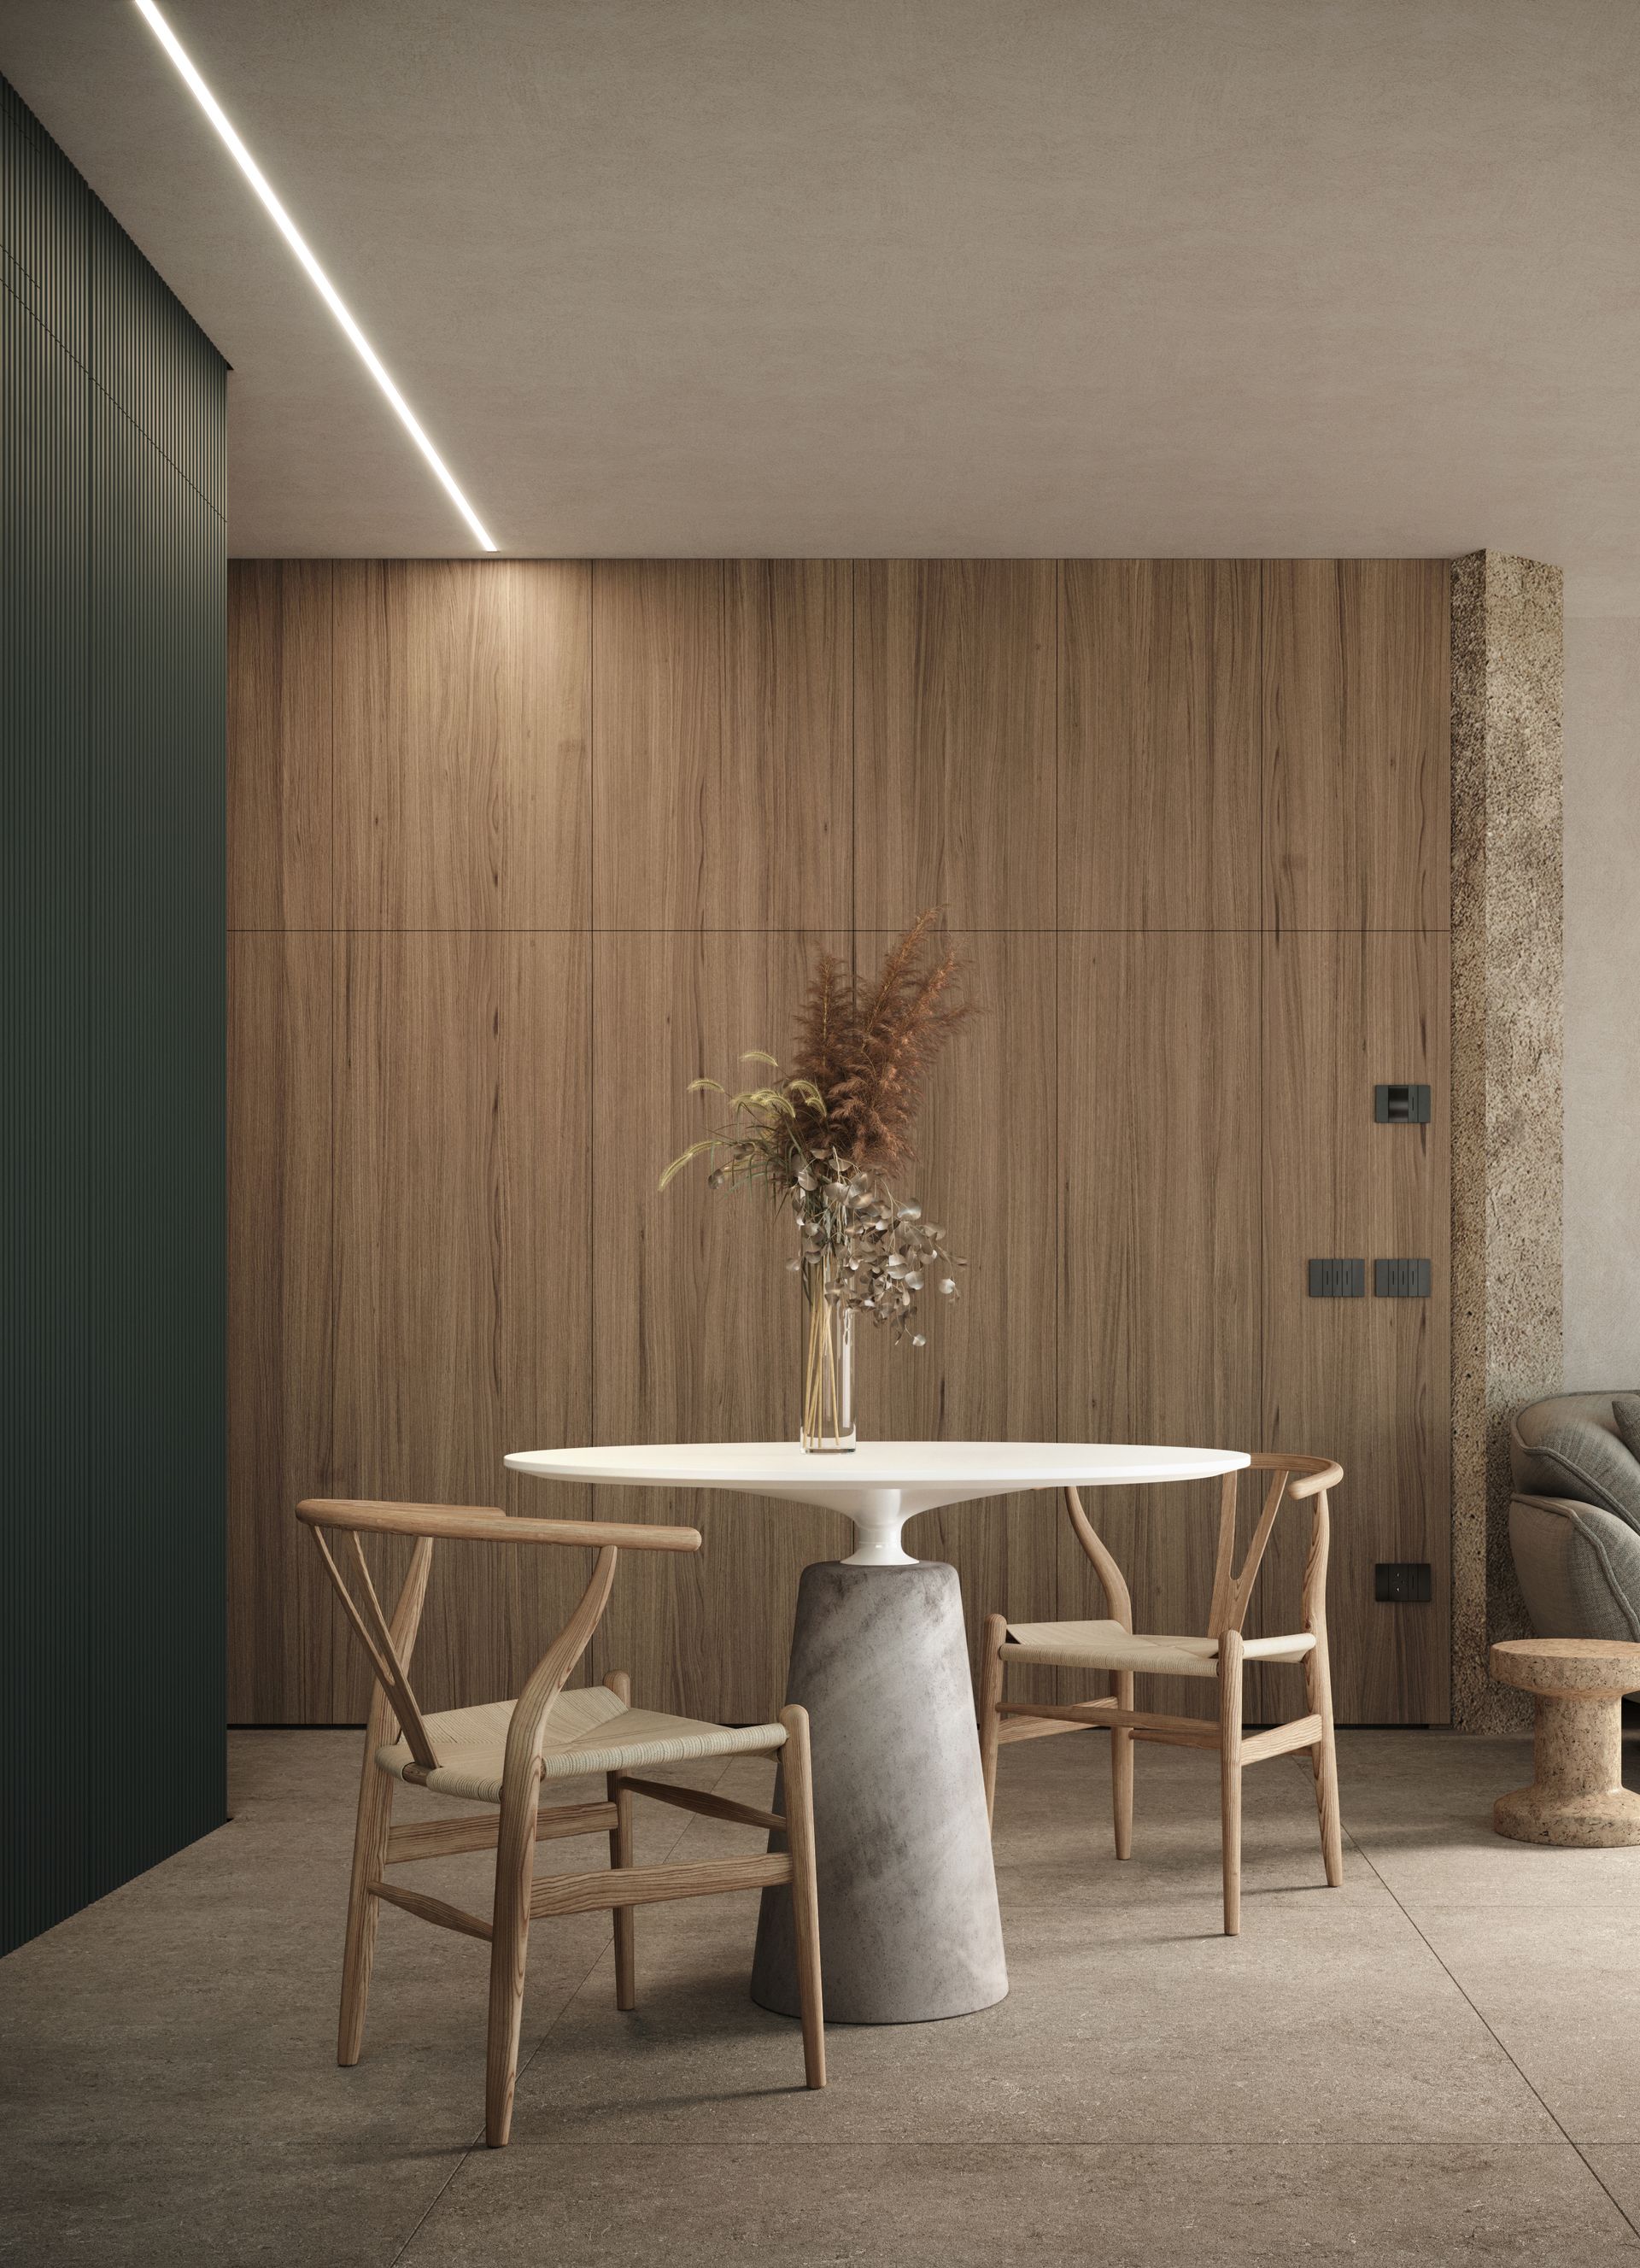 Beach house project, holiday home, tailor made furniture, cedar wood boiserie, Forte dei Marmi, Miami, French Riviera, Cinque Terre, Adriatic. Officina Magisafi architecture design - table detail rendering